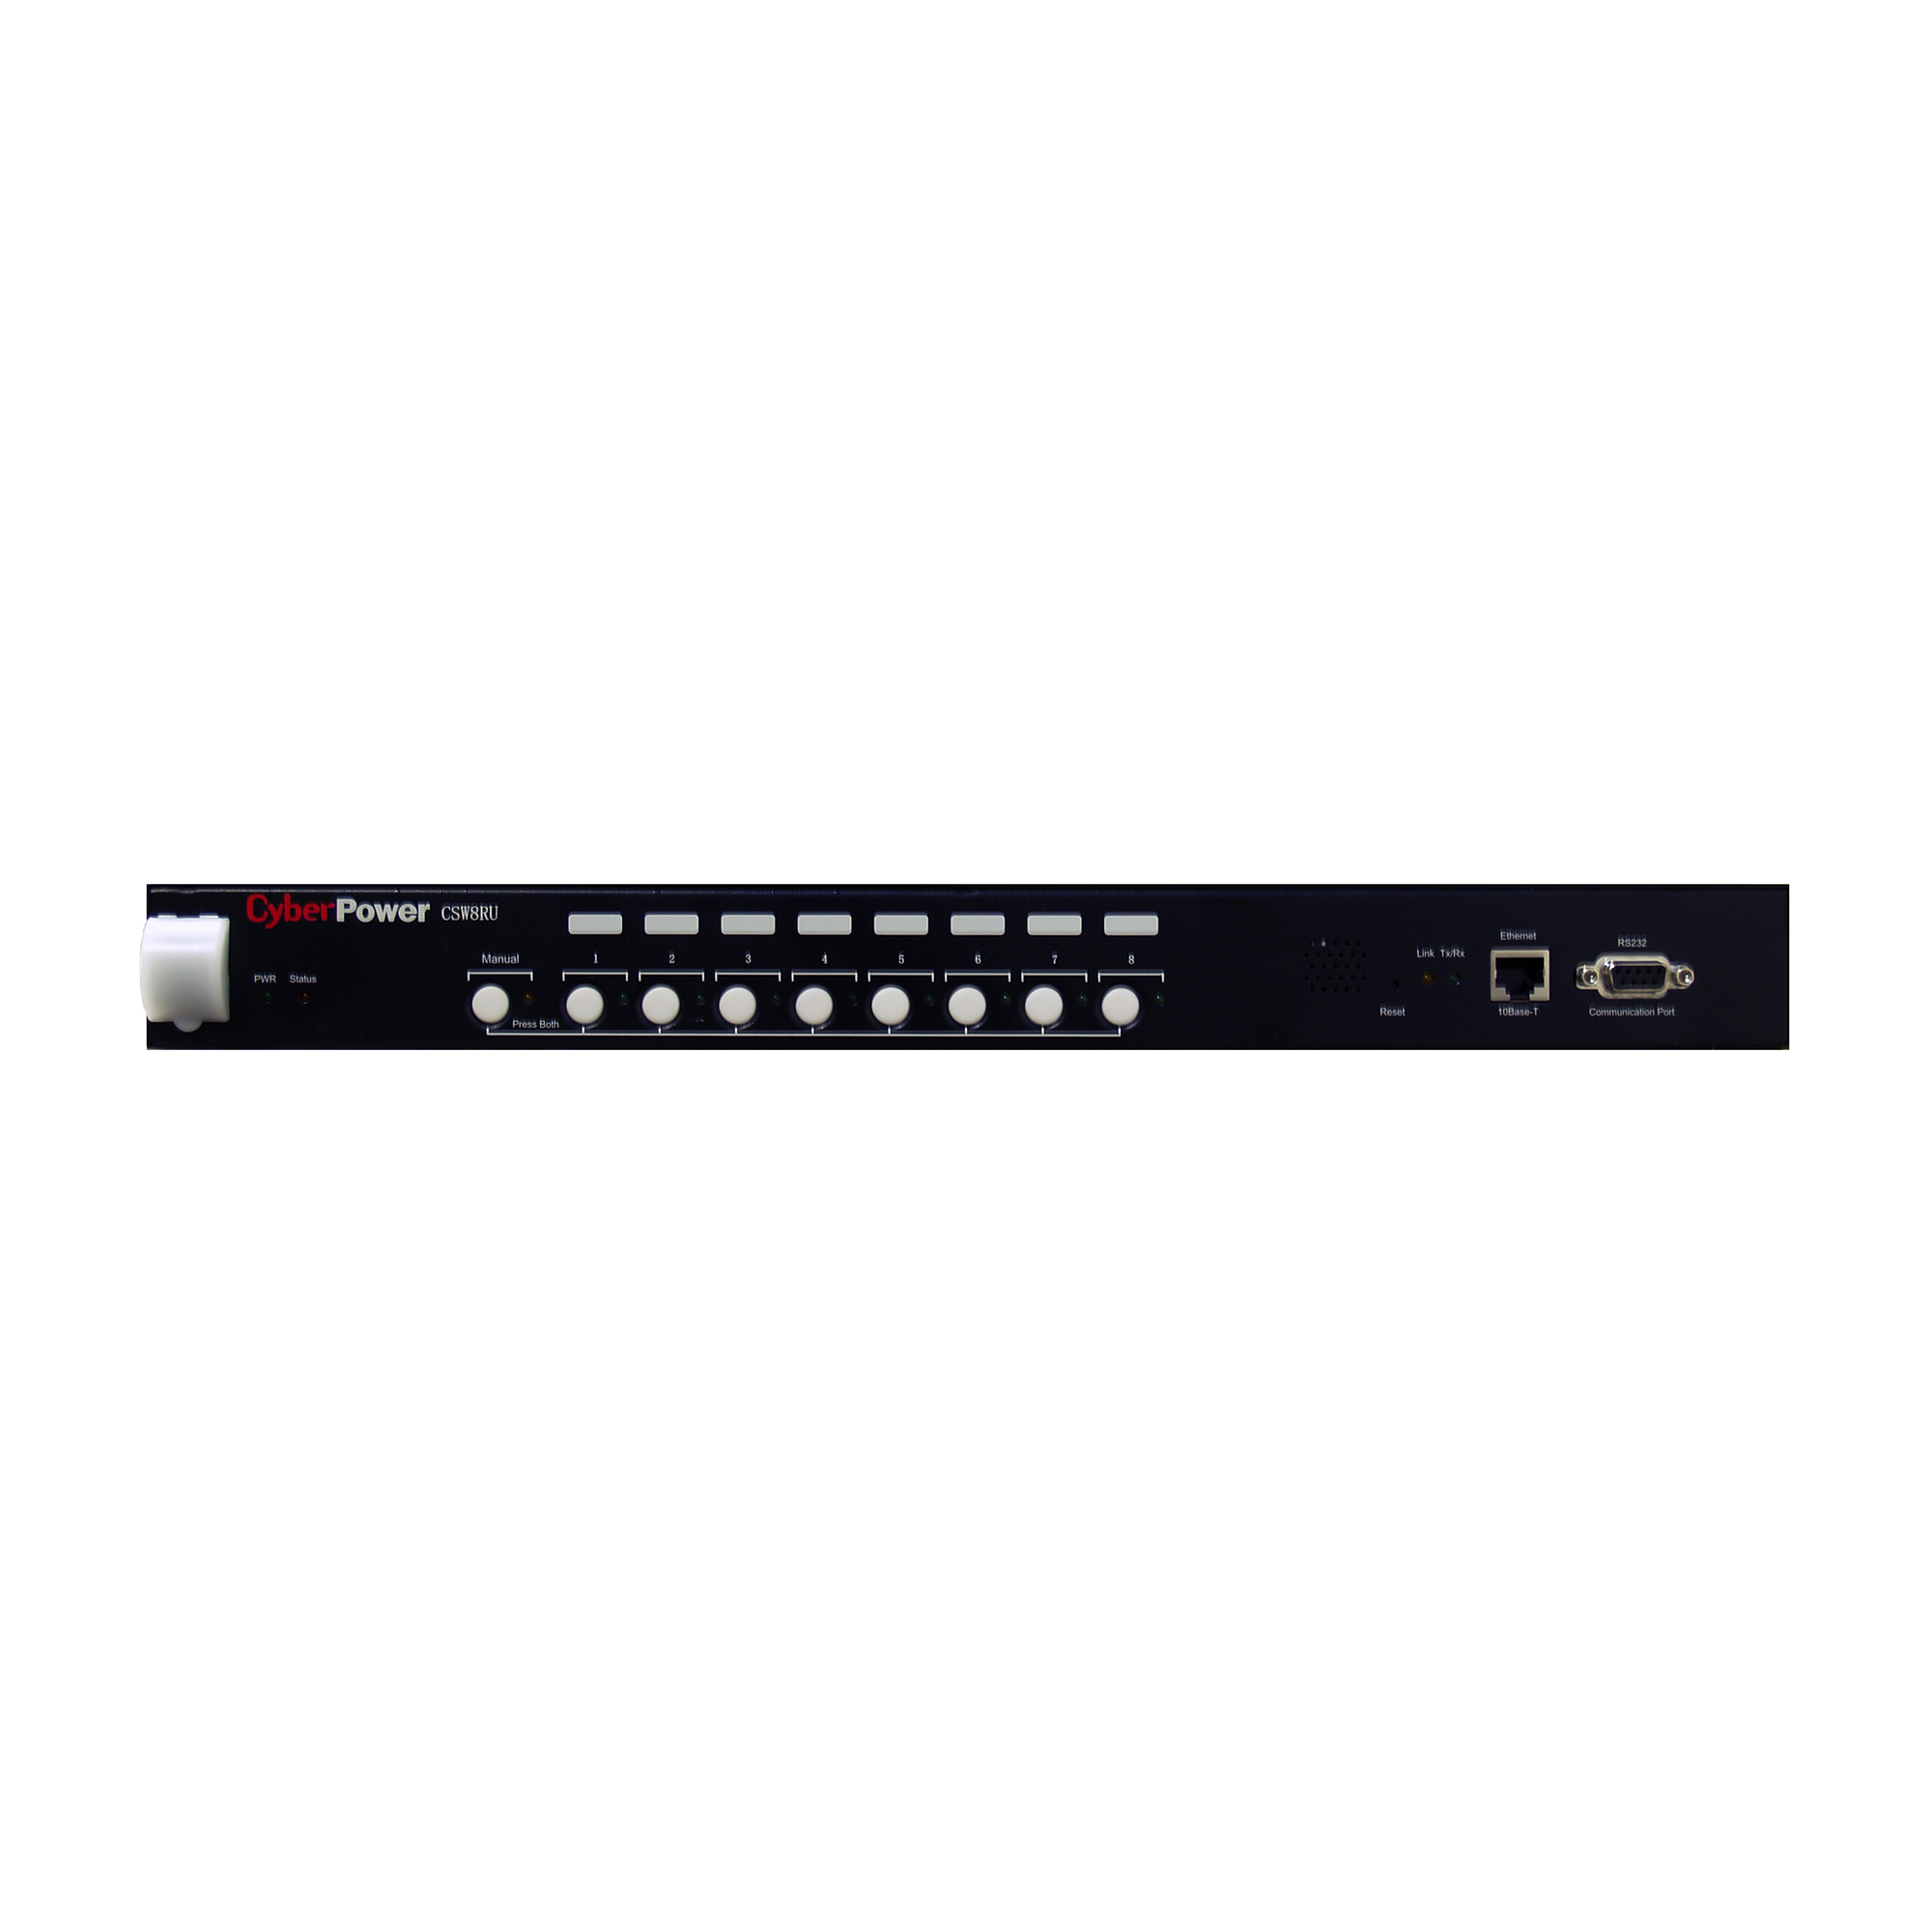 CSW8RU - Switched PDU Series - Product Details, Specs, Downloads ...